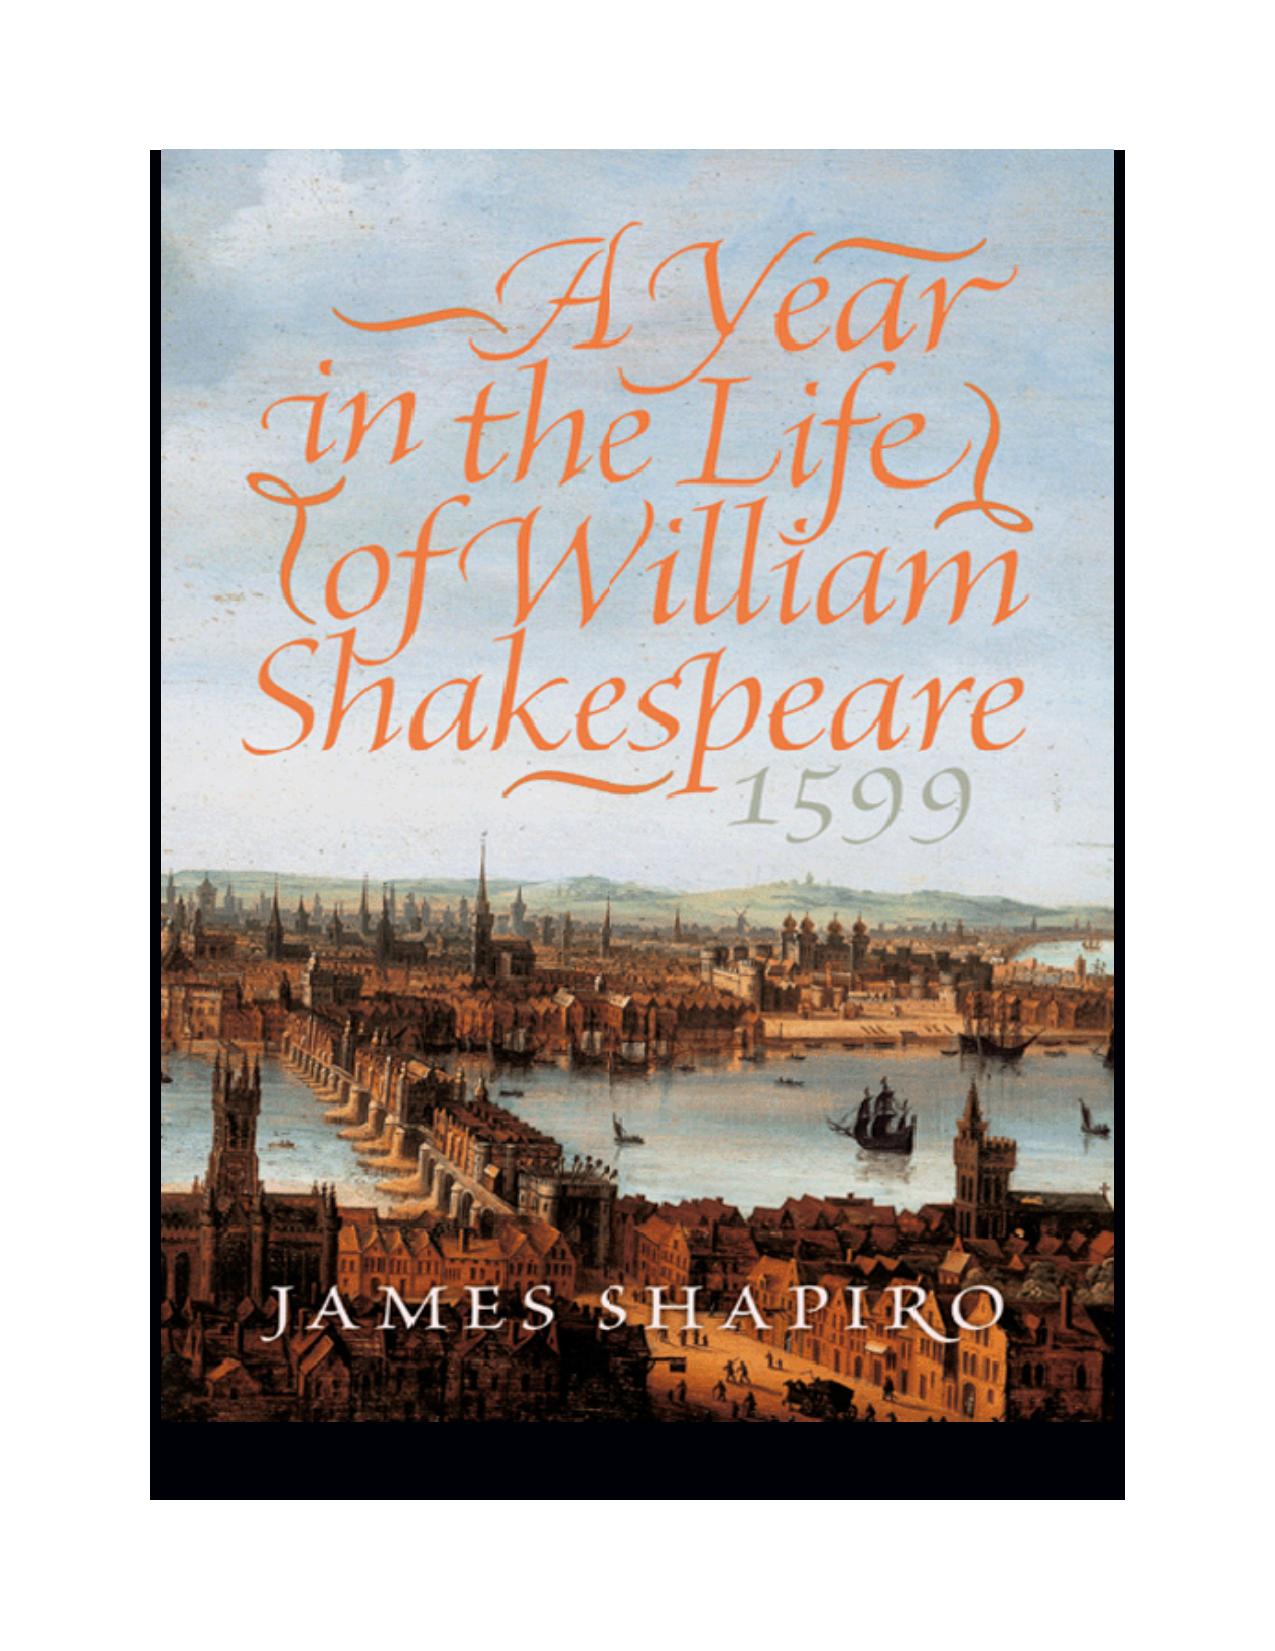 A Year in the Life of William Shakespeare